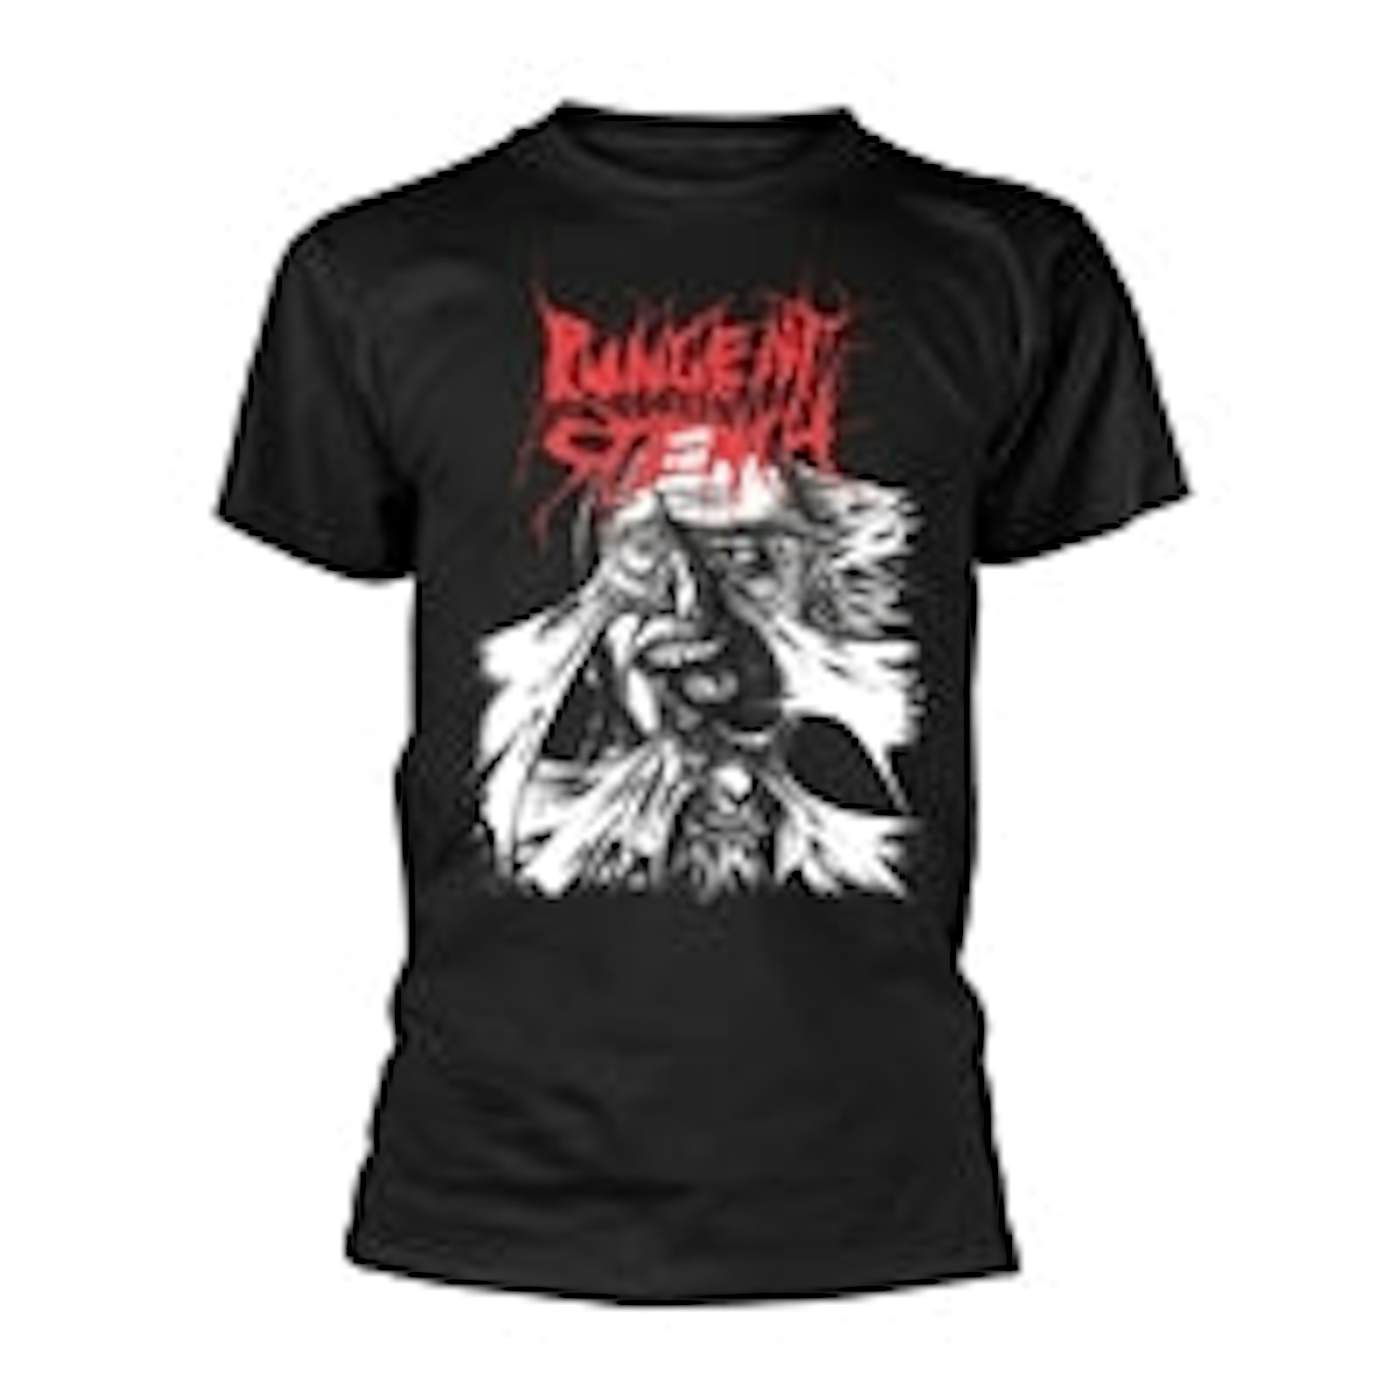 Pungent Stench T Shirt - First Recordings